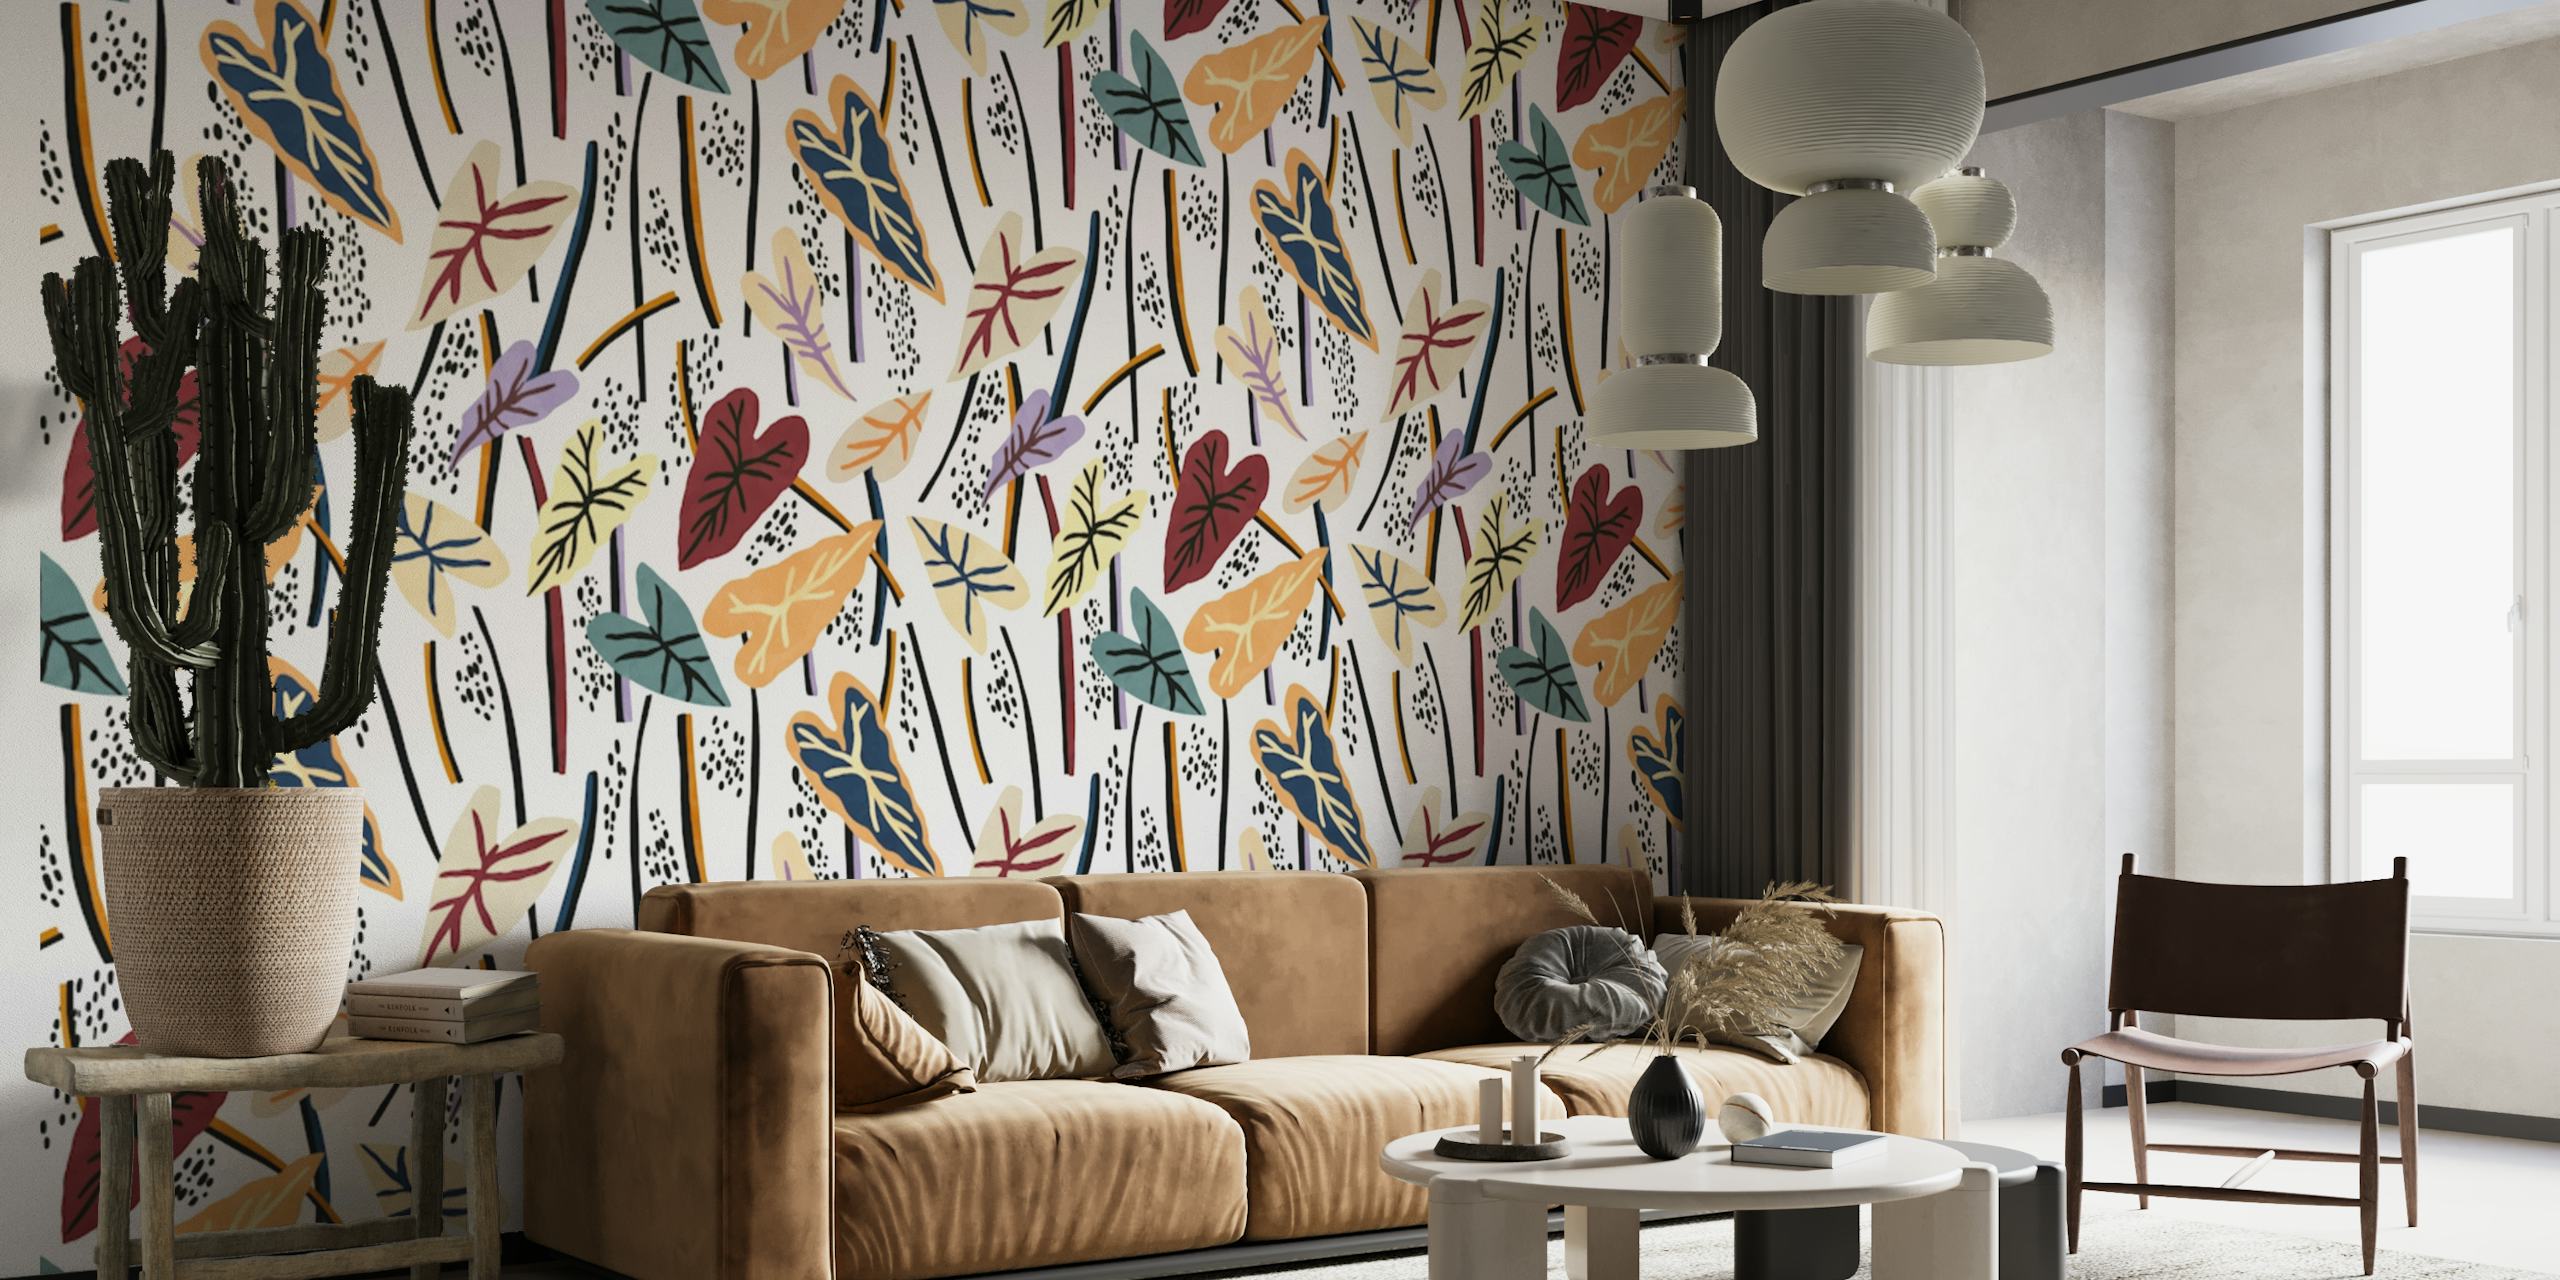 Colorful abstract leaf wall mural with a mixture of jungle motifs